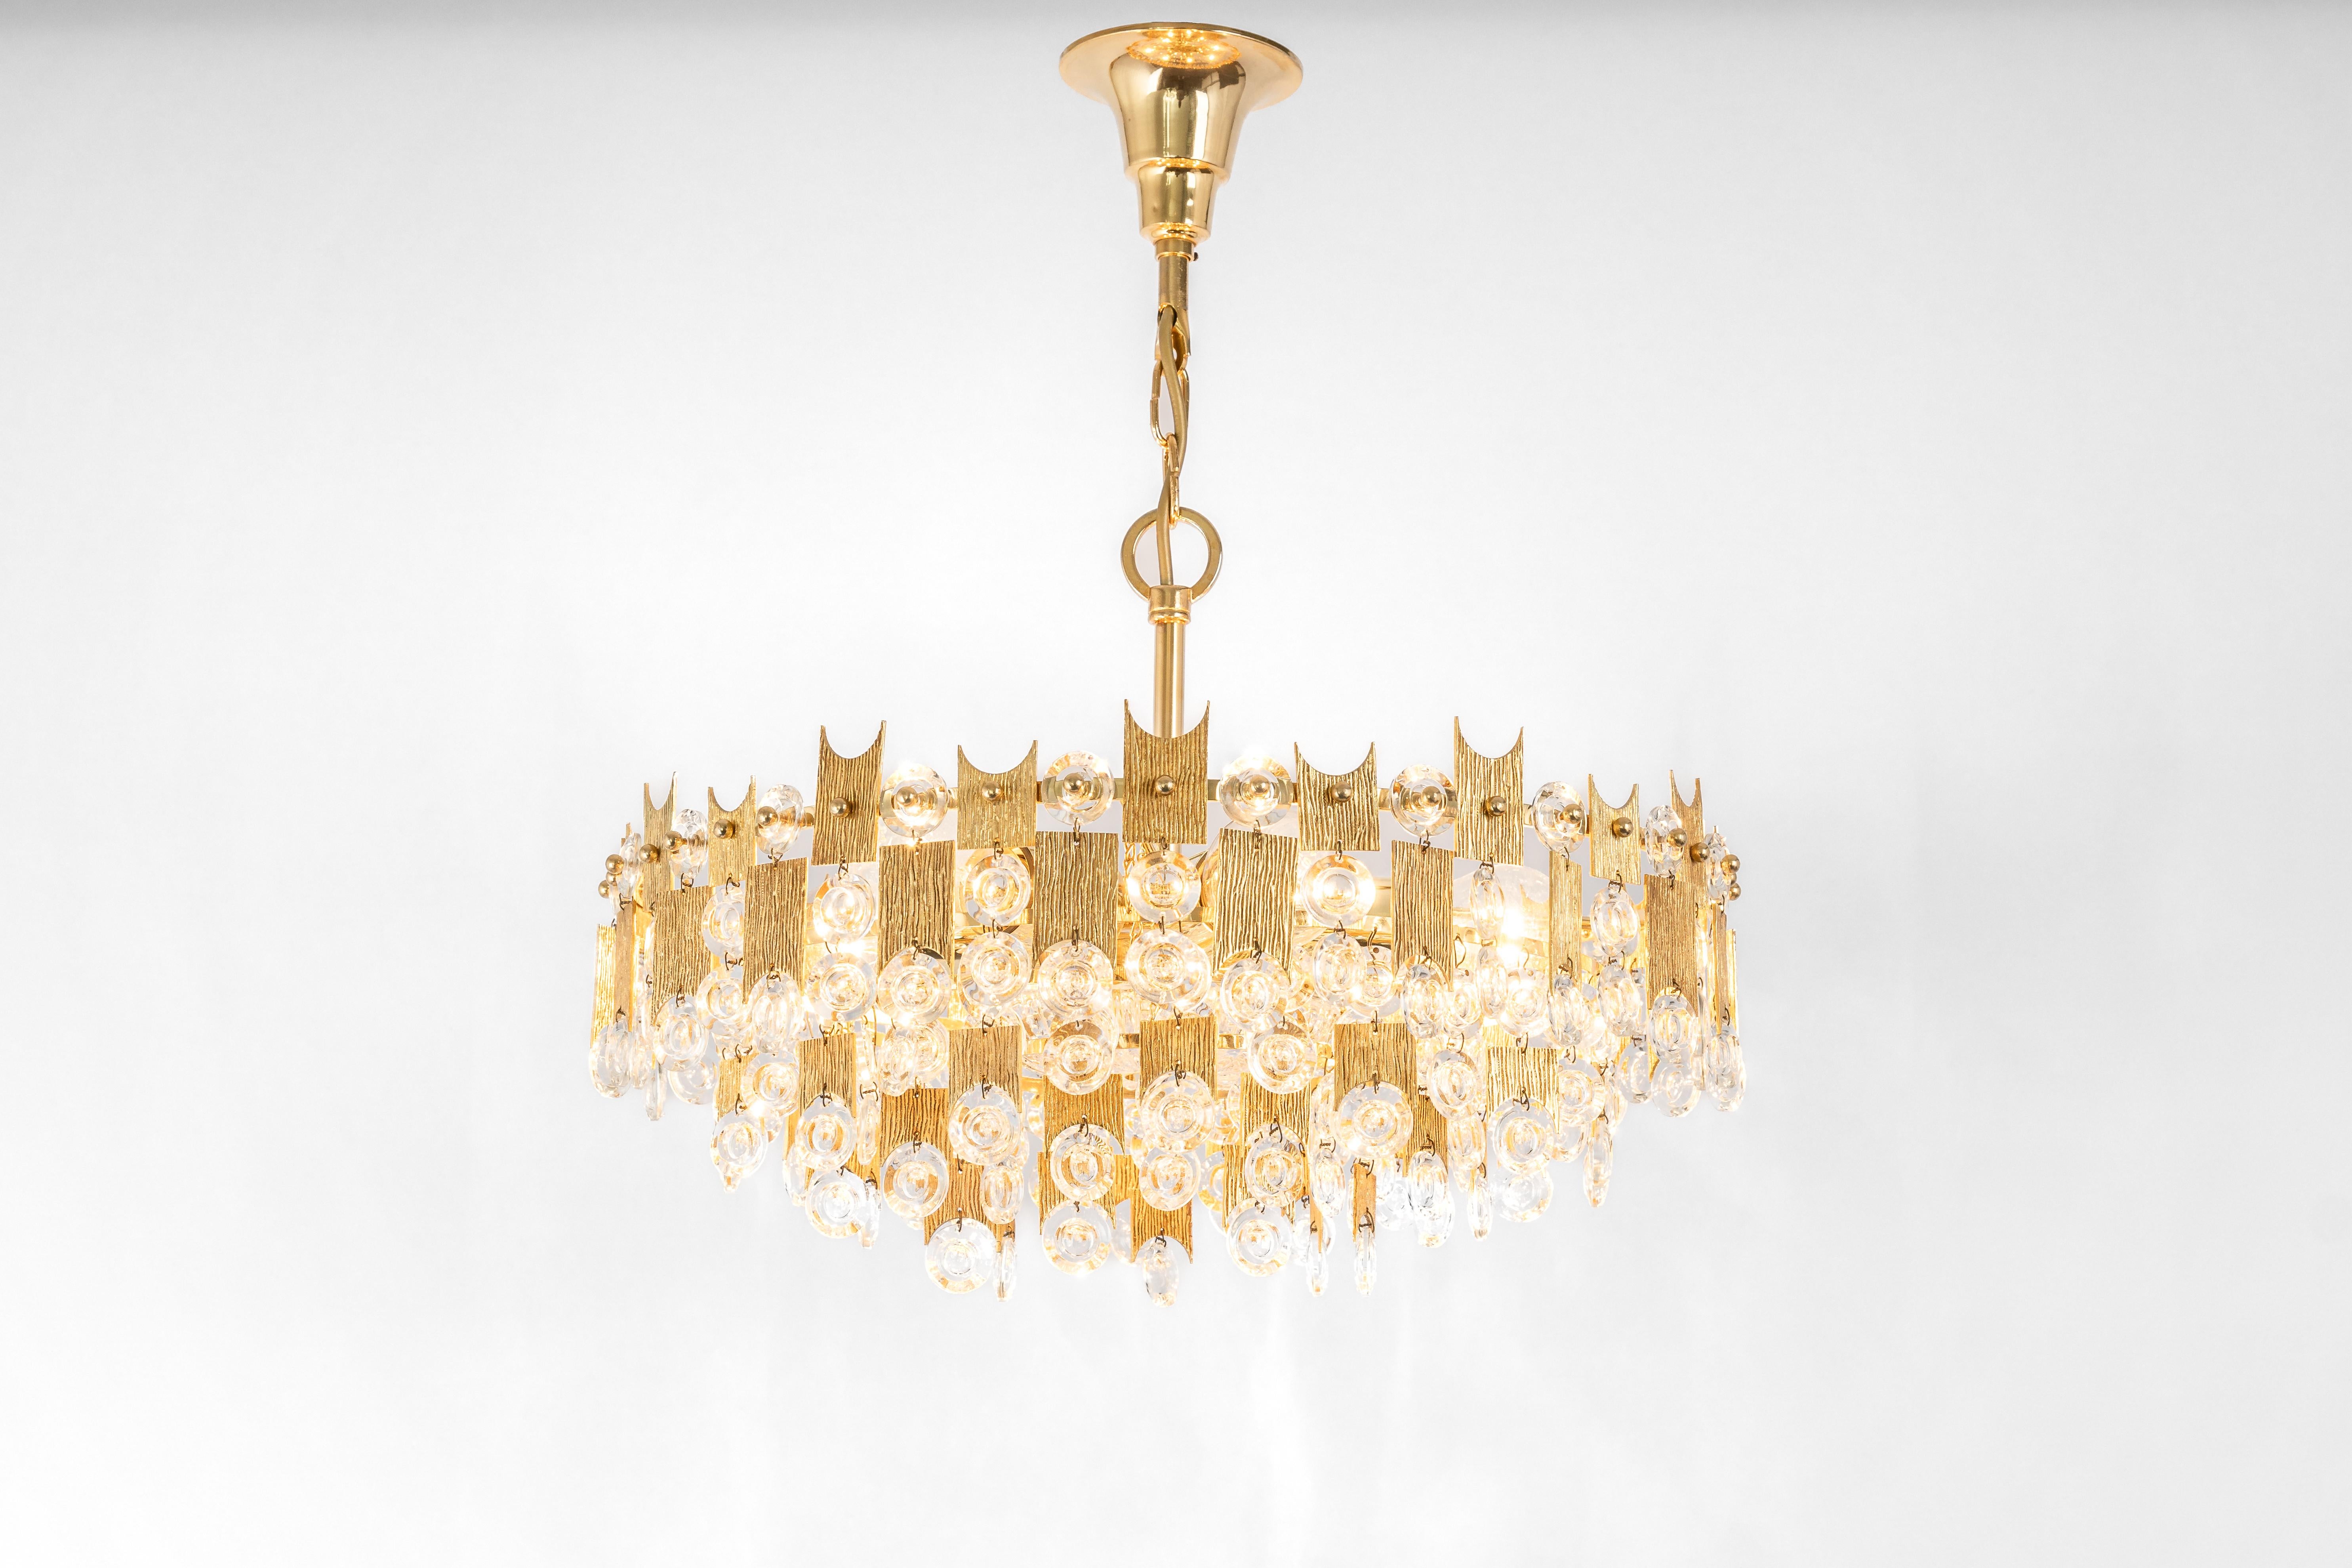 Impressive Large Gilt Brass and Crystal Glass Chandelier by Palwa Germany, 1960s For Sale 4